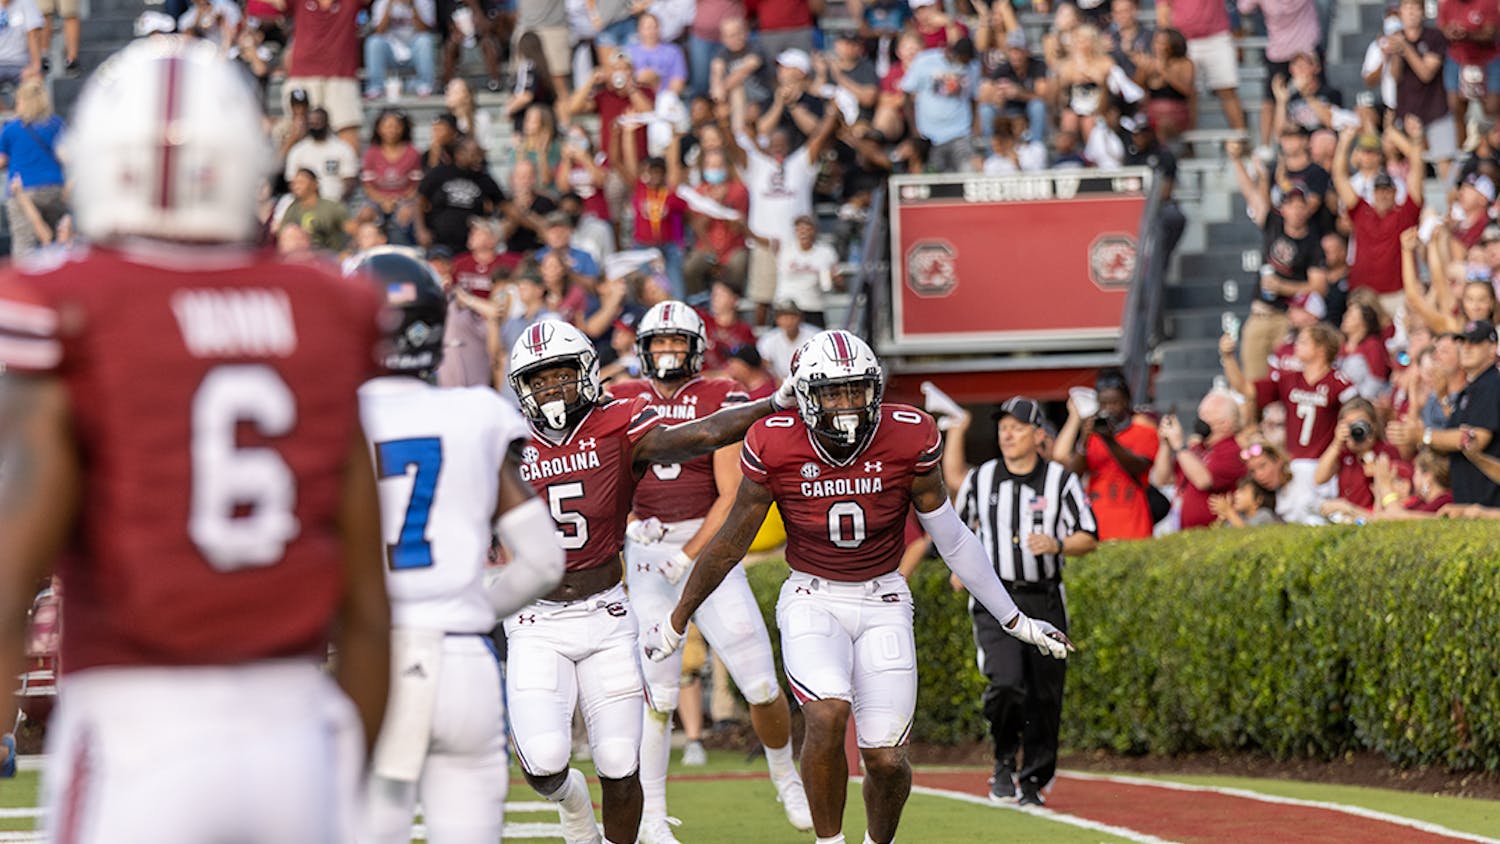 FILE— Sophomore tight end Jaheim Bell celebrates a touchdown pass from graduate student quarterback Zeb Noland. This touchdown would bring the Gamecocks to 15 points at the end of the first quarter in their game against East Illinois Panthers on Sept. 9, 2021.